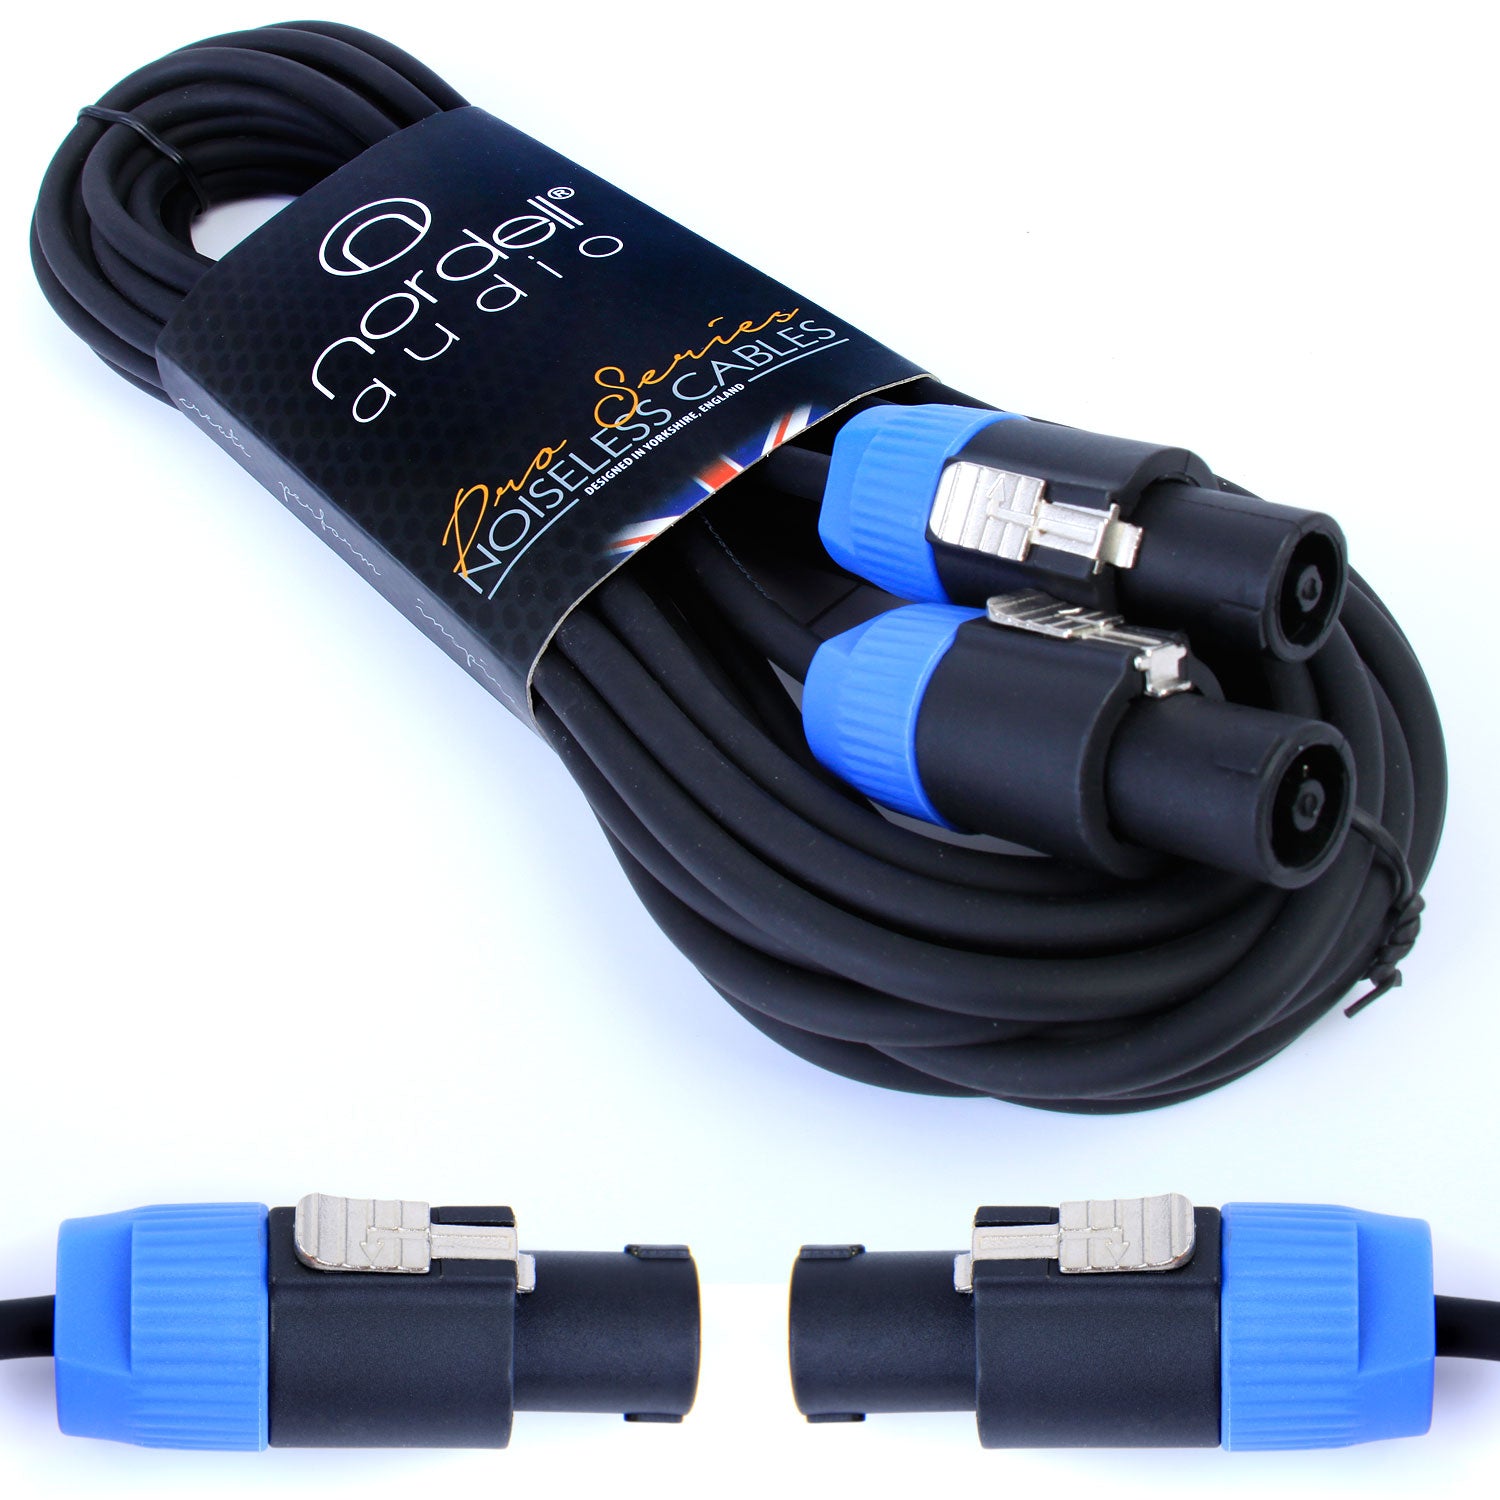 Nordell Speaker Cables